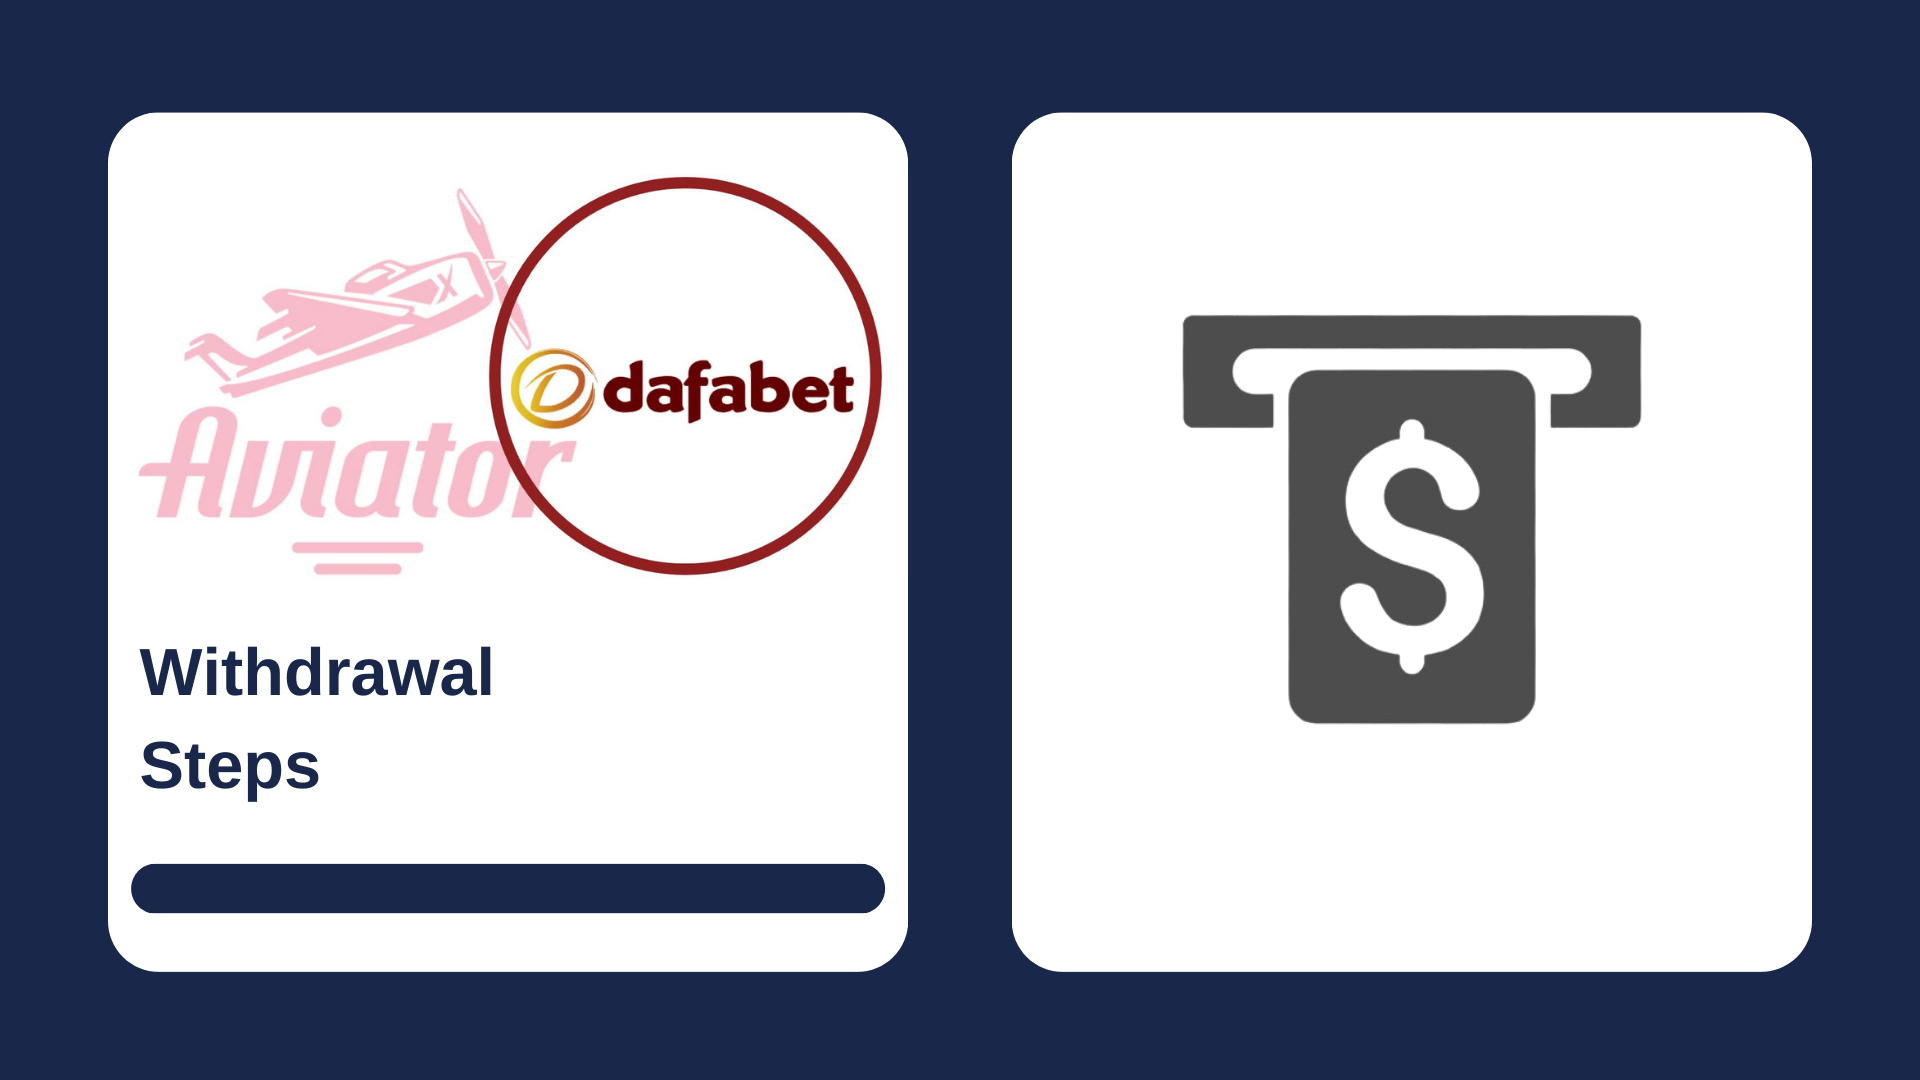 First picture showing Aviator and Dafabet logos with text, and second - withdrawal money icon